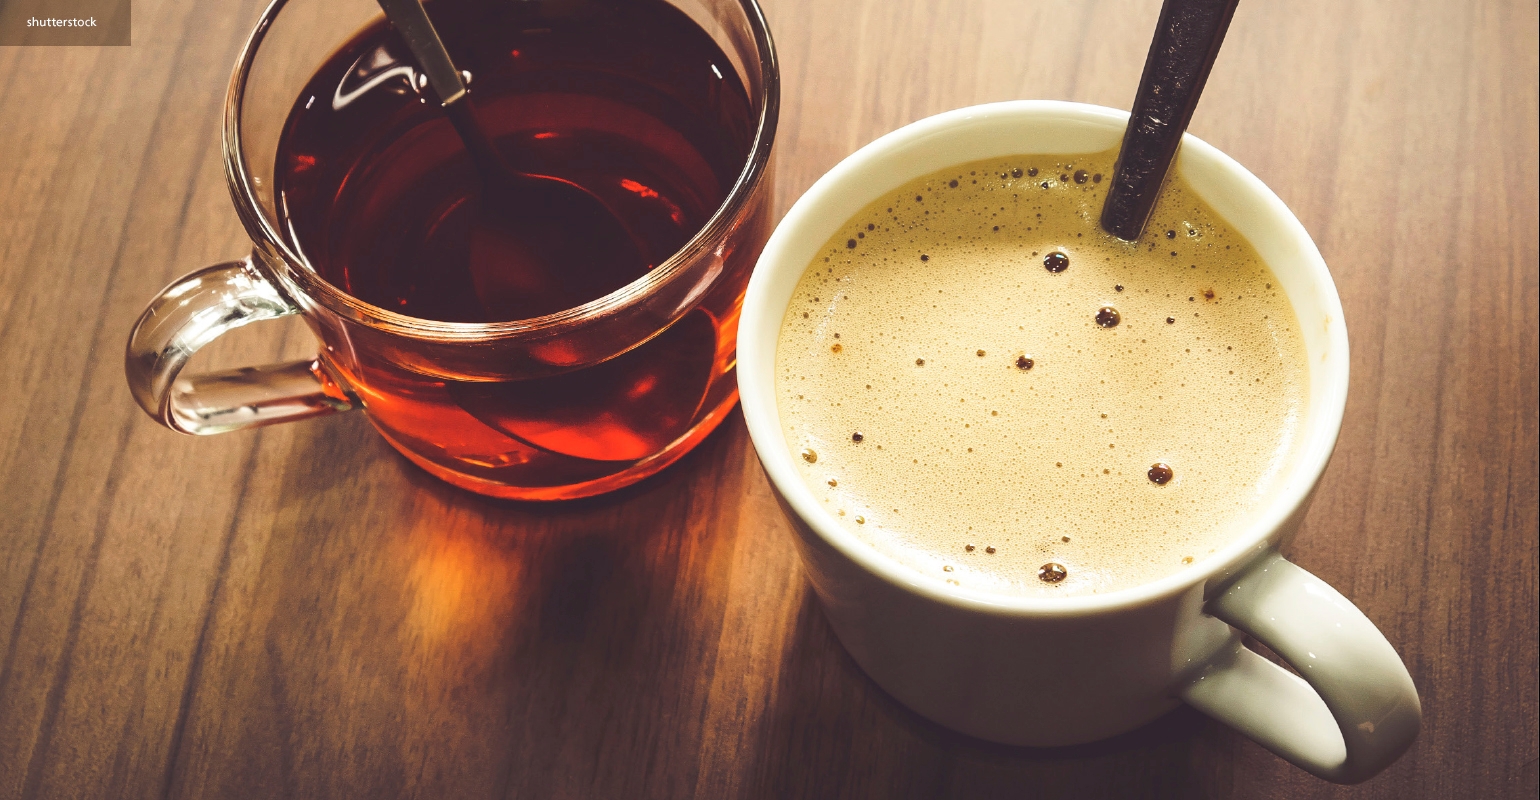 A new kind of brew: Innovations in coffee and tea